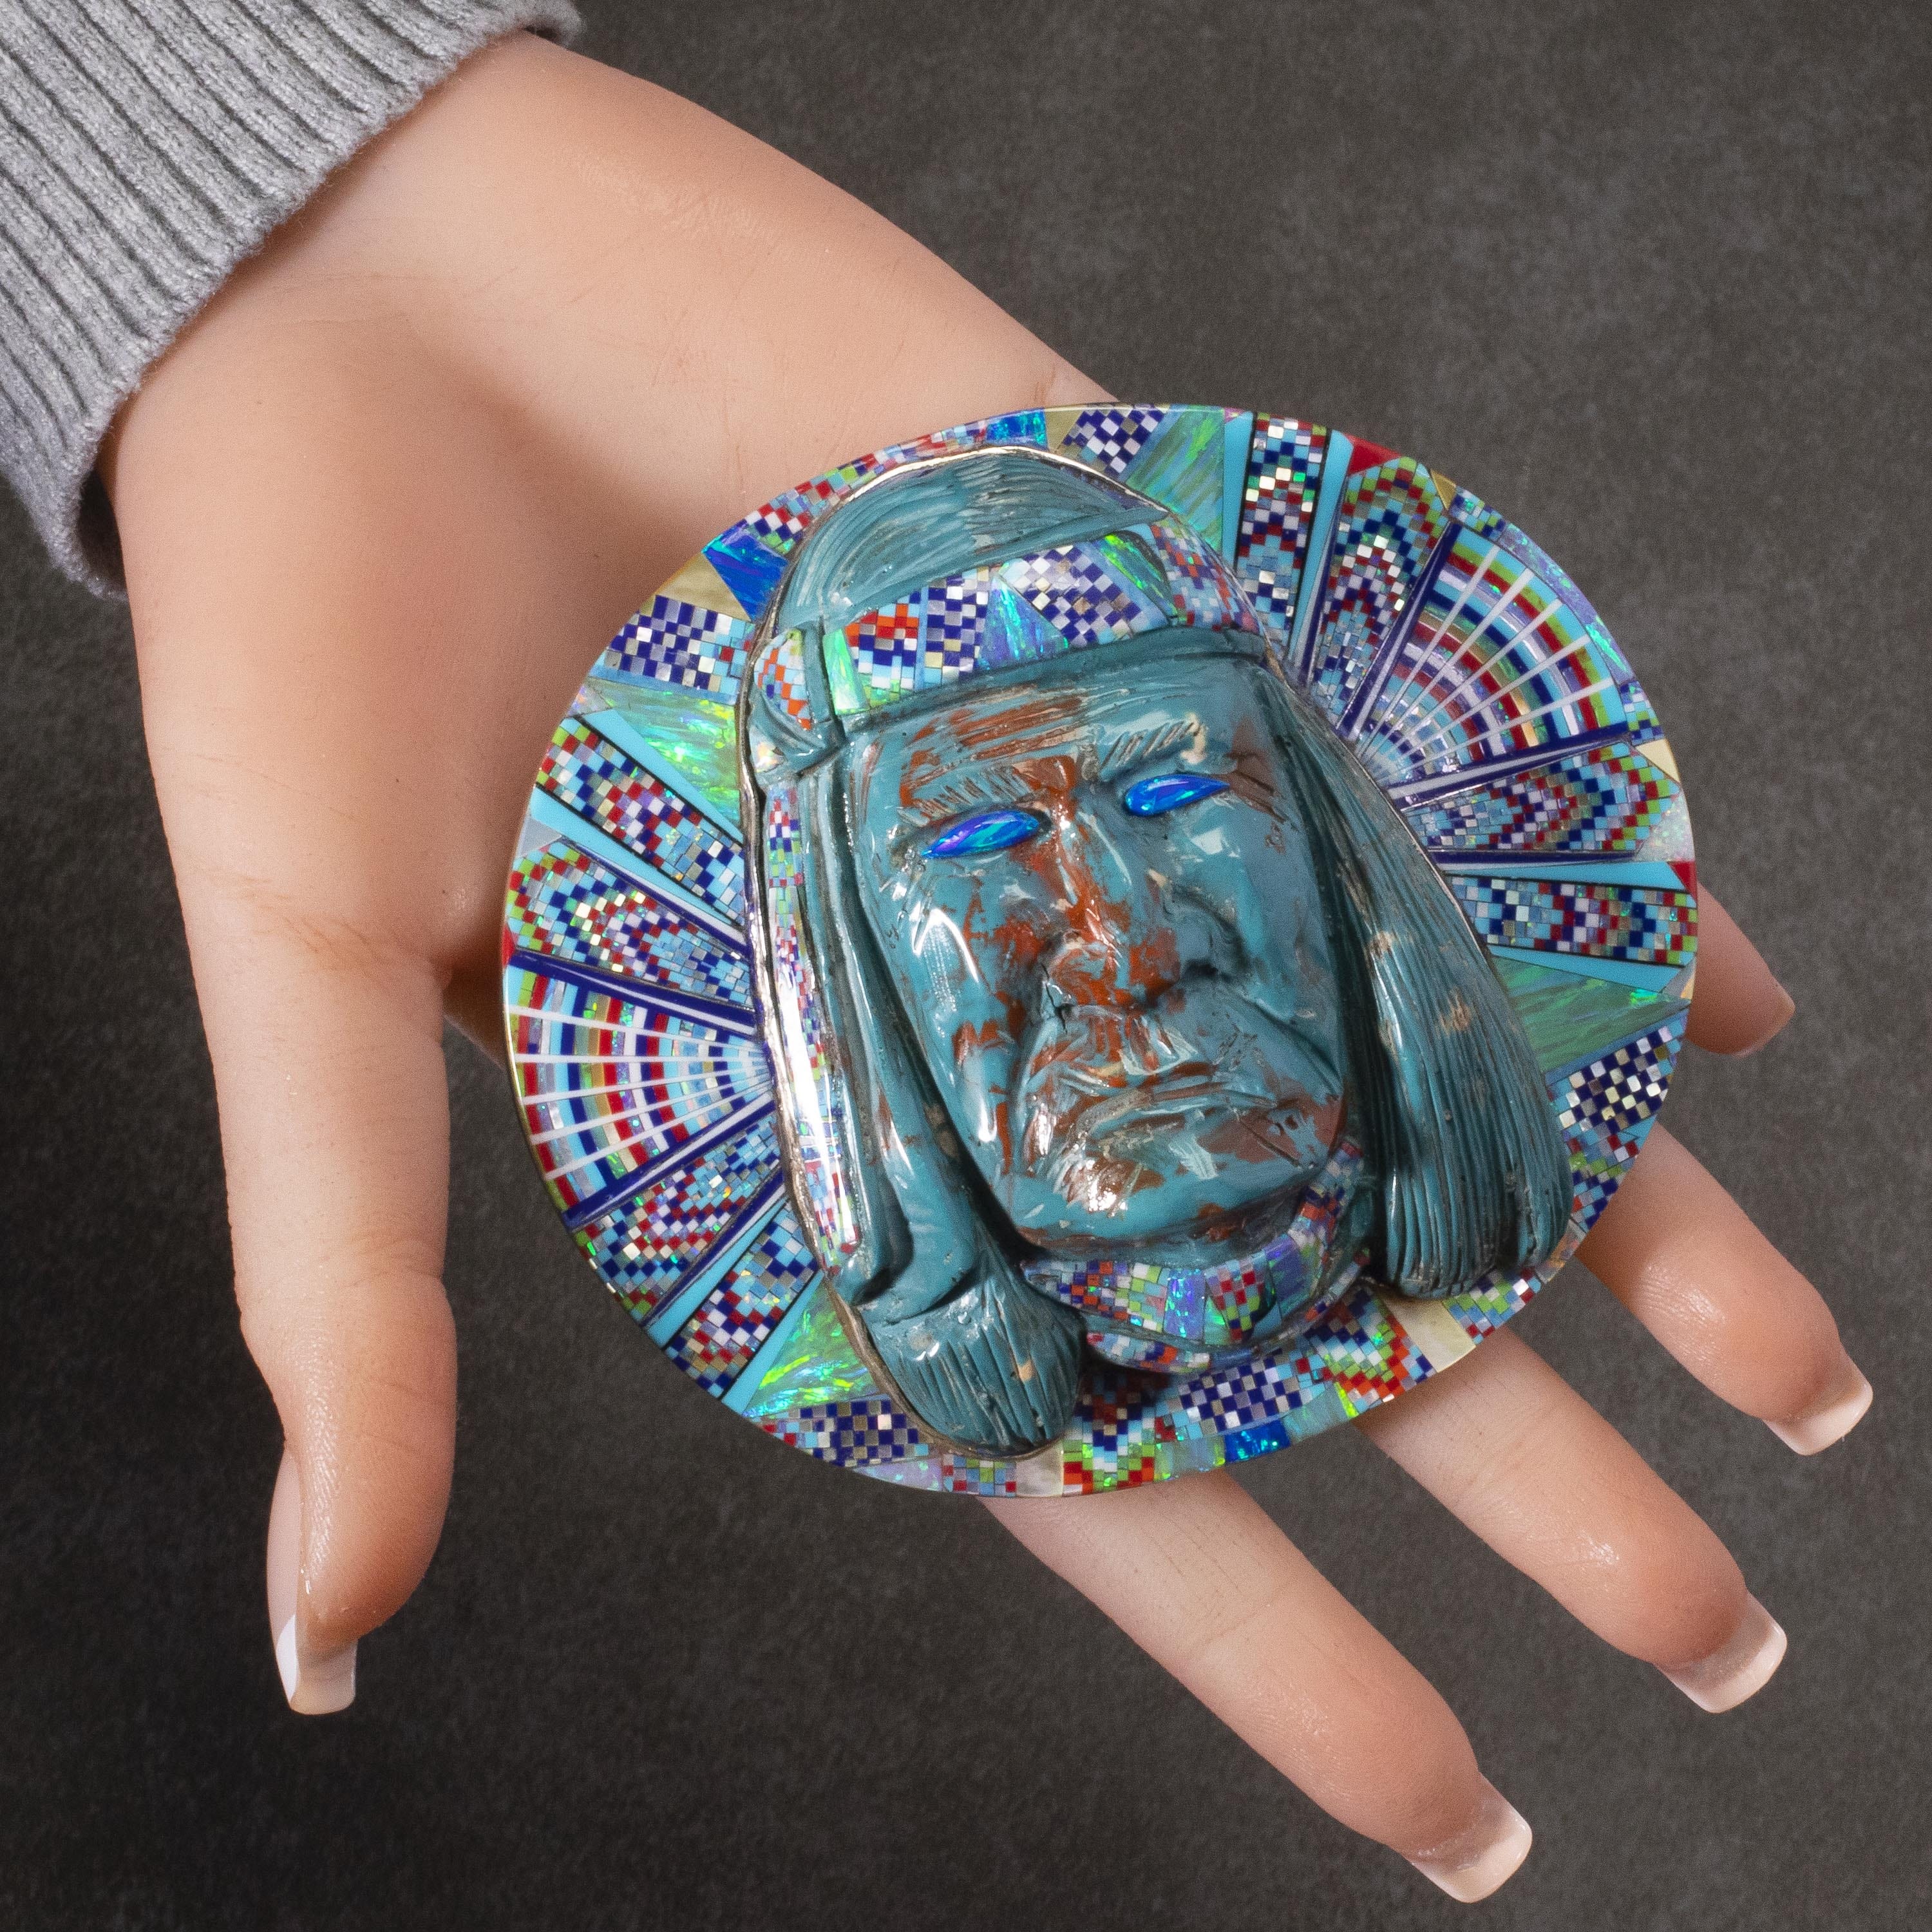 KALIFANO Southwest Silver Jewelry Multi Gem Opal Micro Inlay with Genuine Turquoise Indian Chief Handmade 925 Sterling Silver Oval Belt Buckle AKBB4800.001